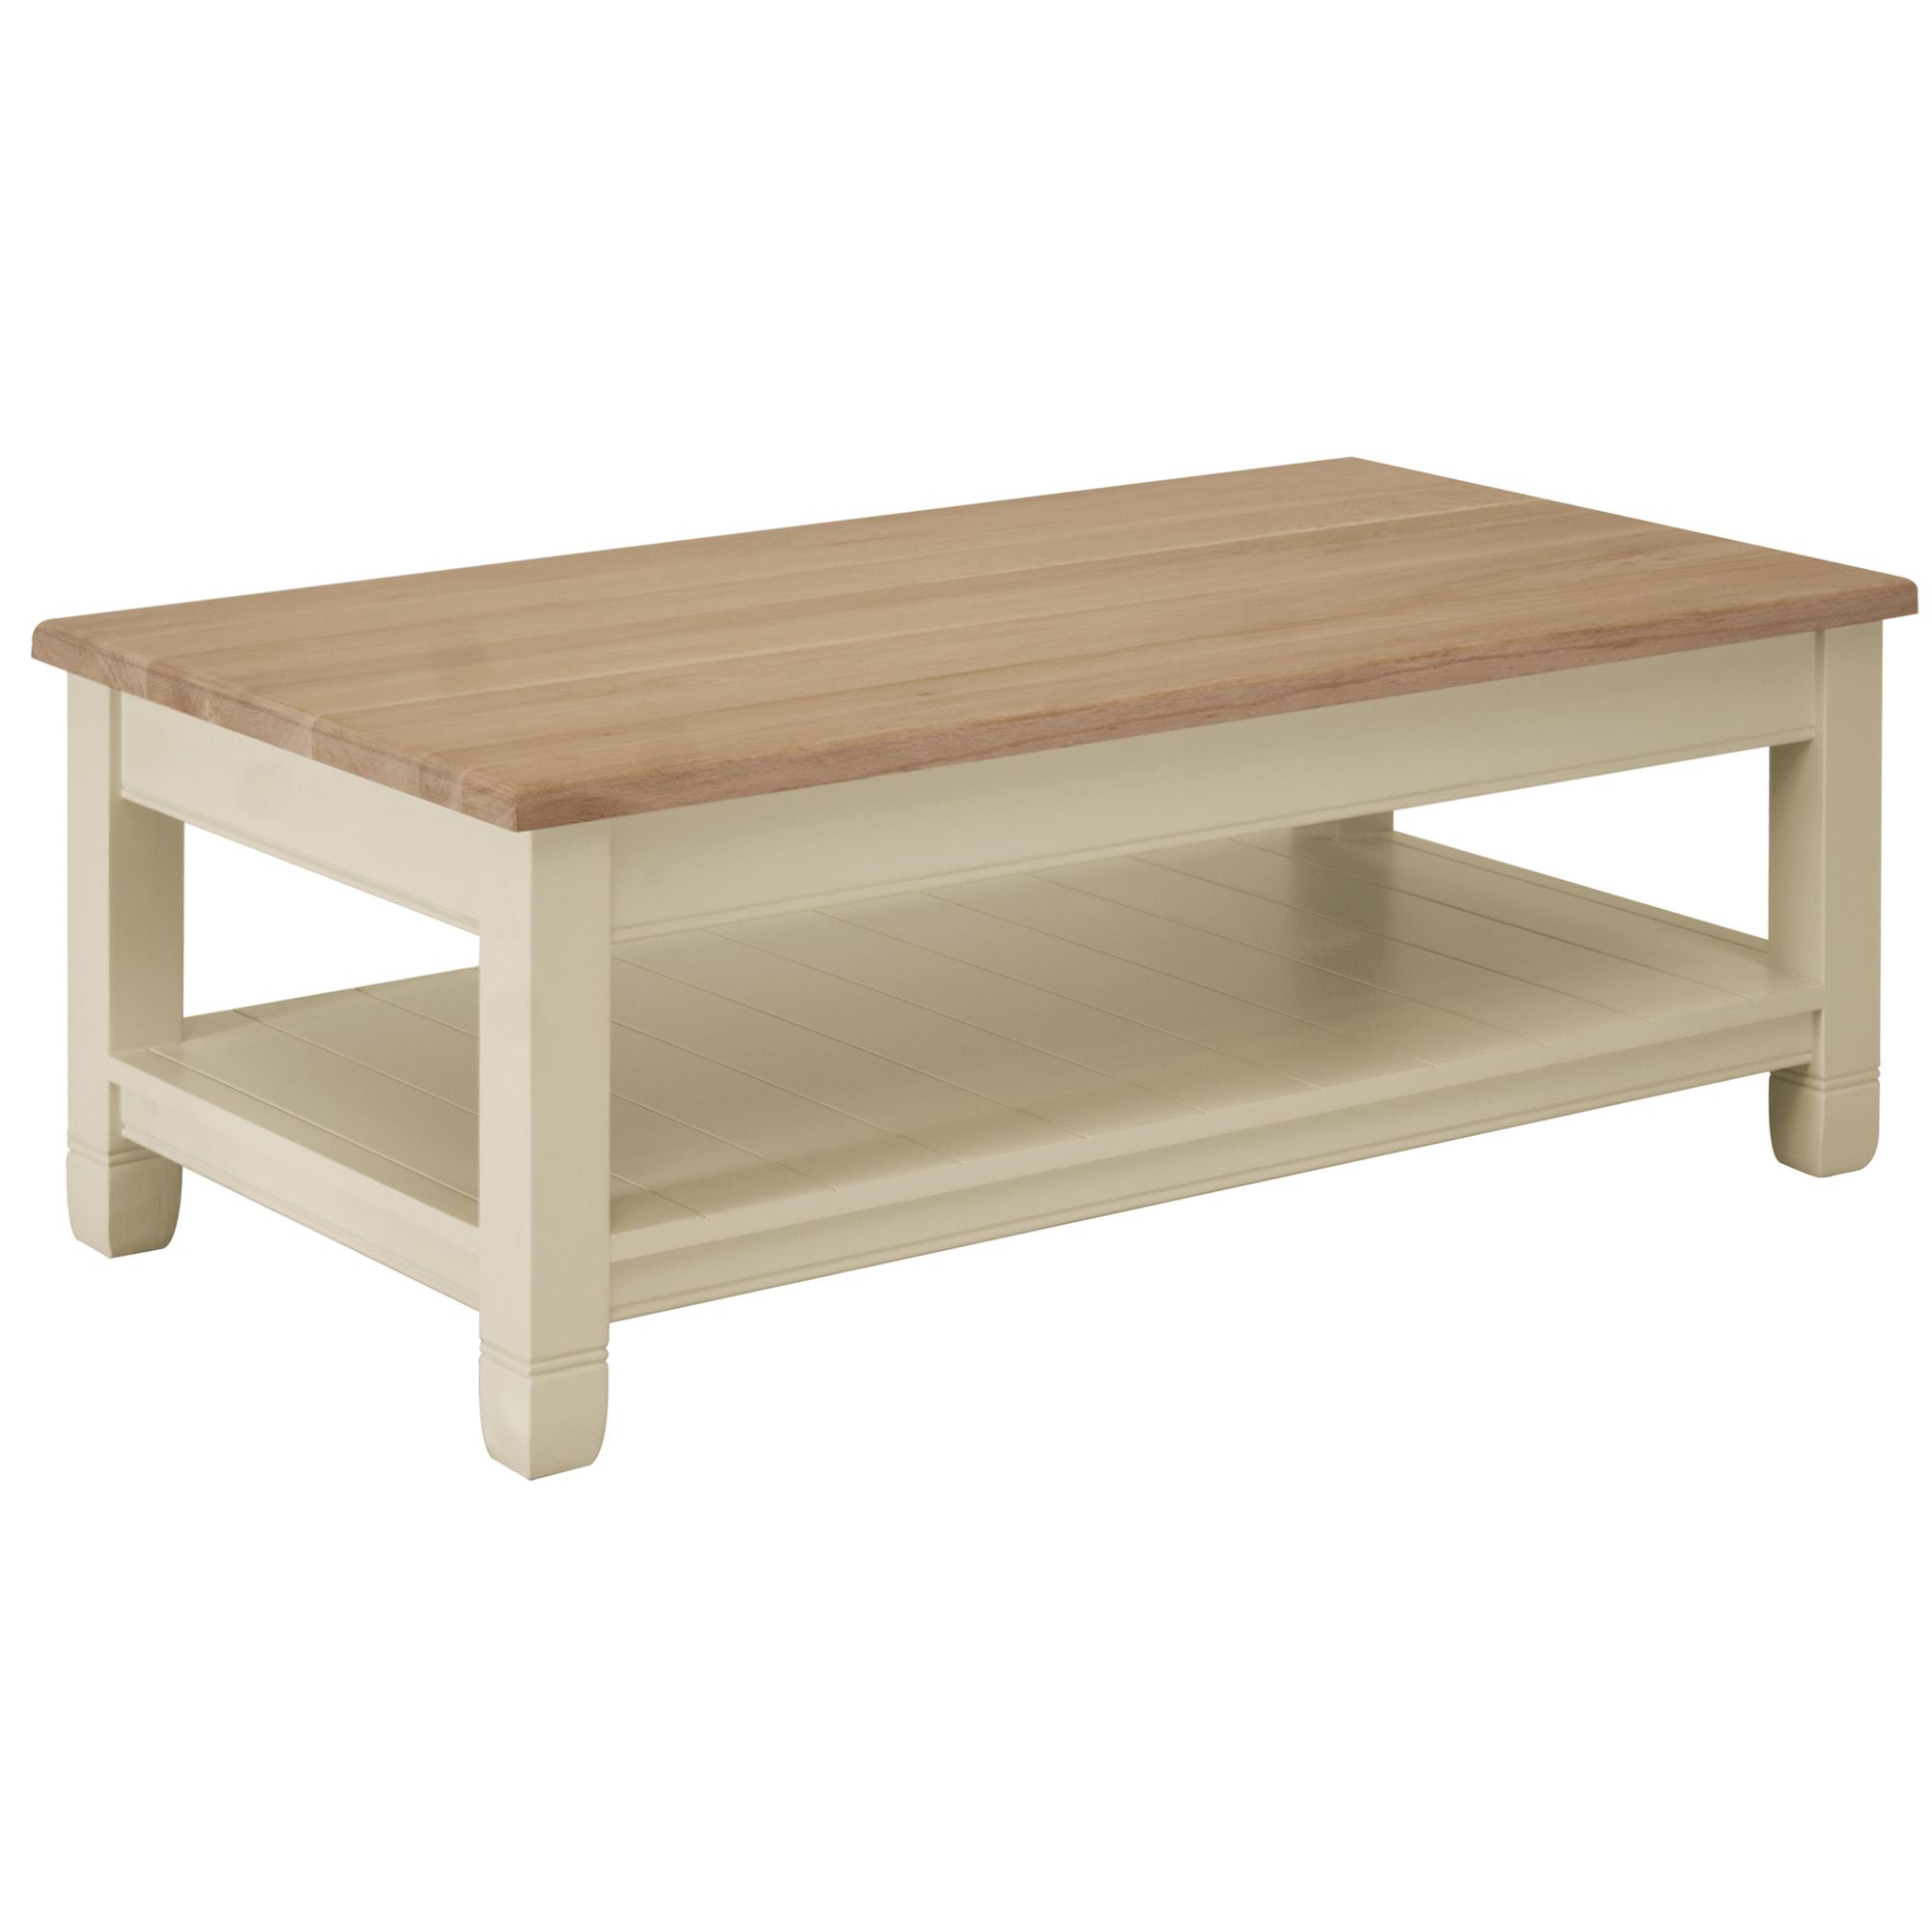 Neptune Chichester Square Coffee Table at John Lewis